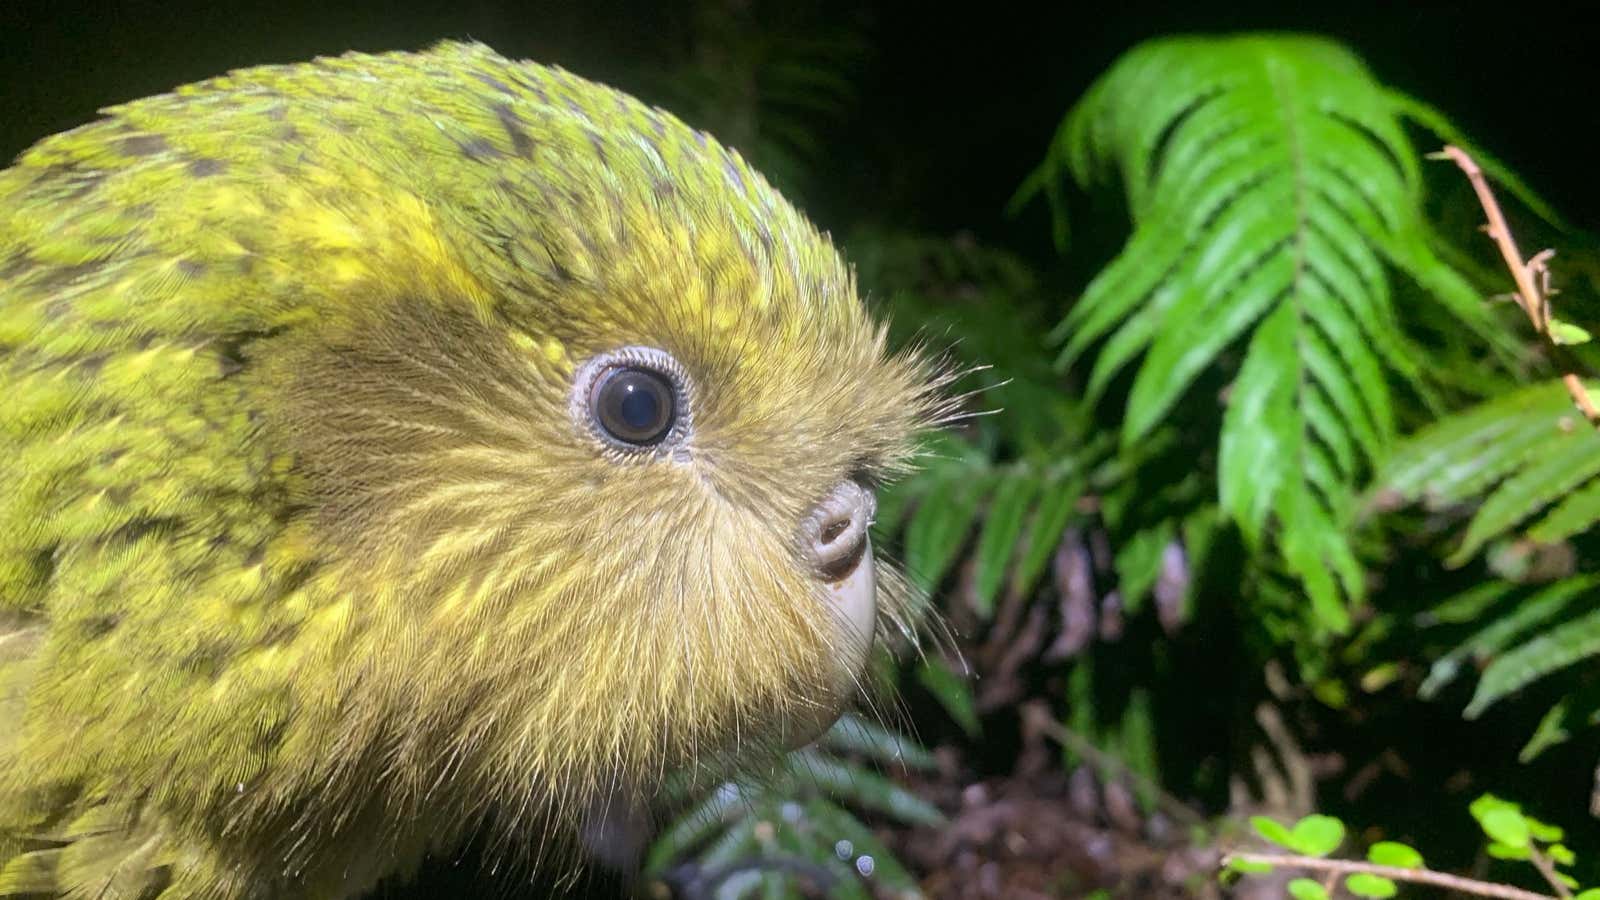 Suzanne-3-A-19, a kakapo who just got checked for diseases